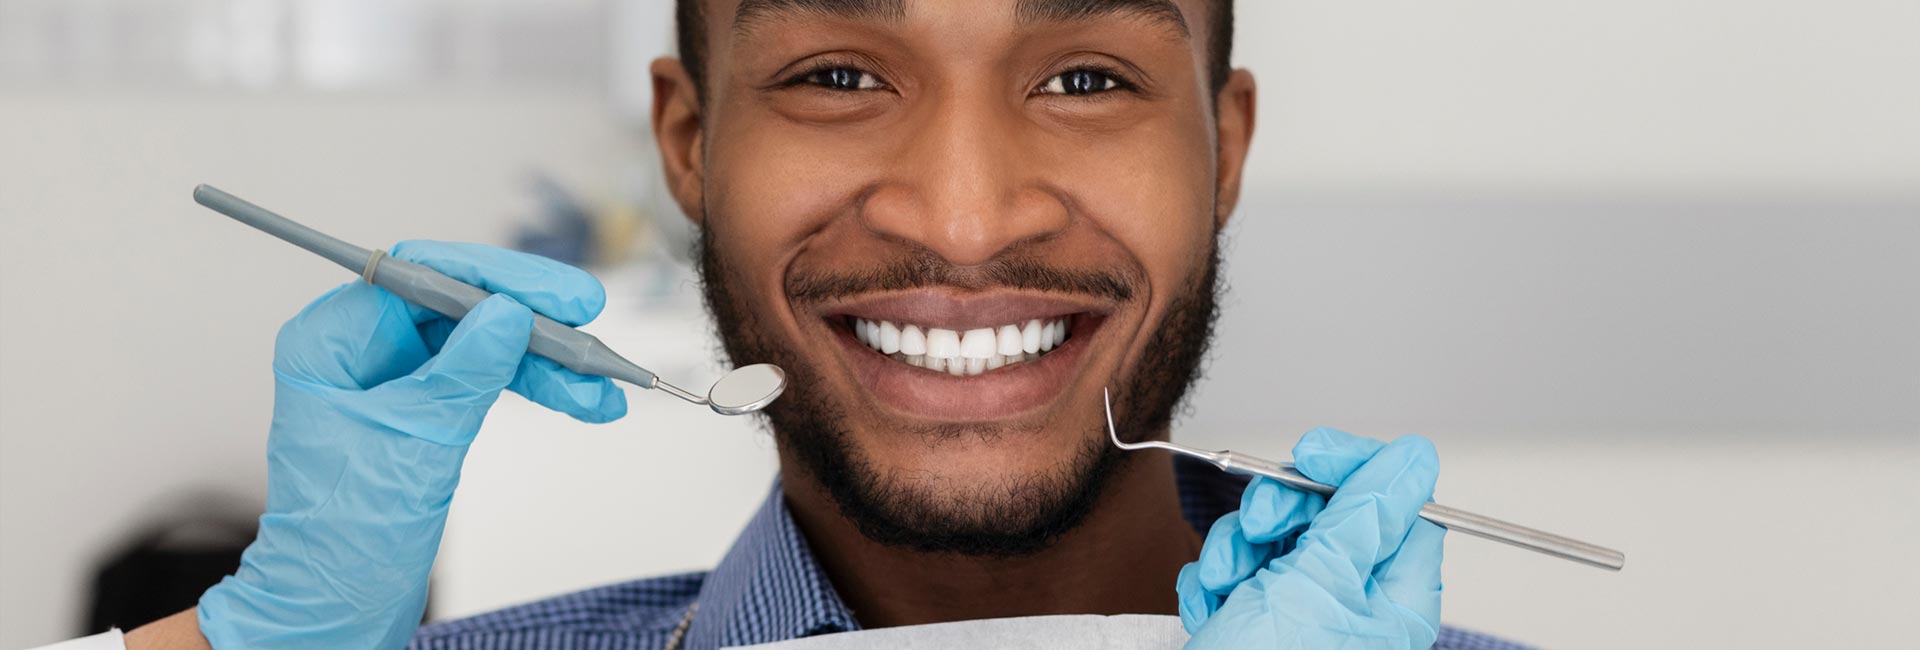 A young man smiling at the dentist during examination